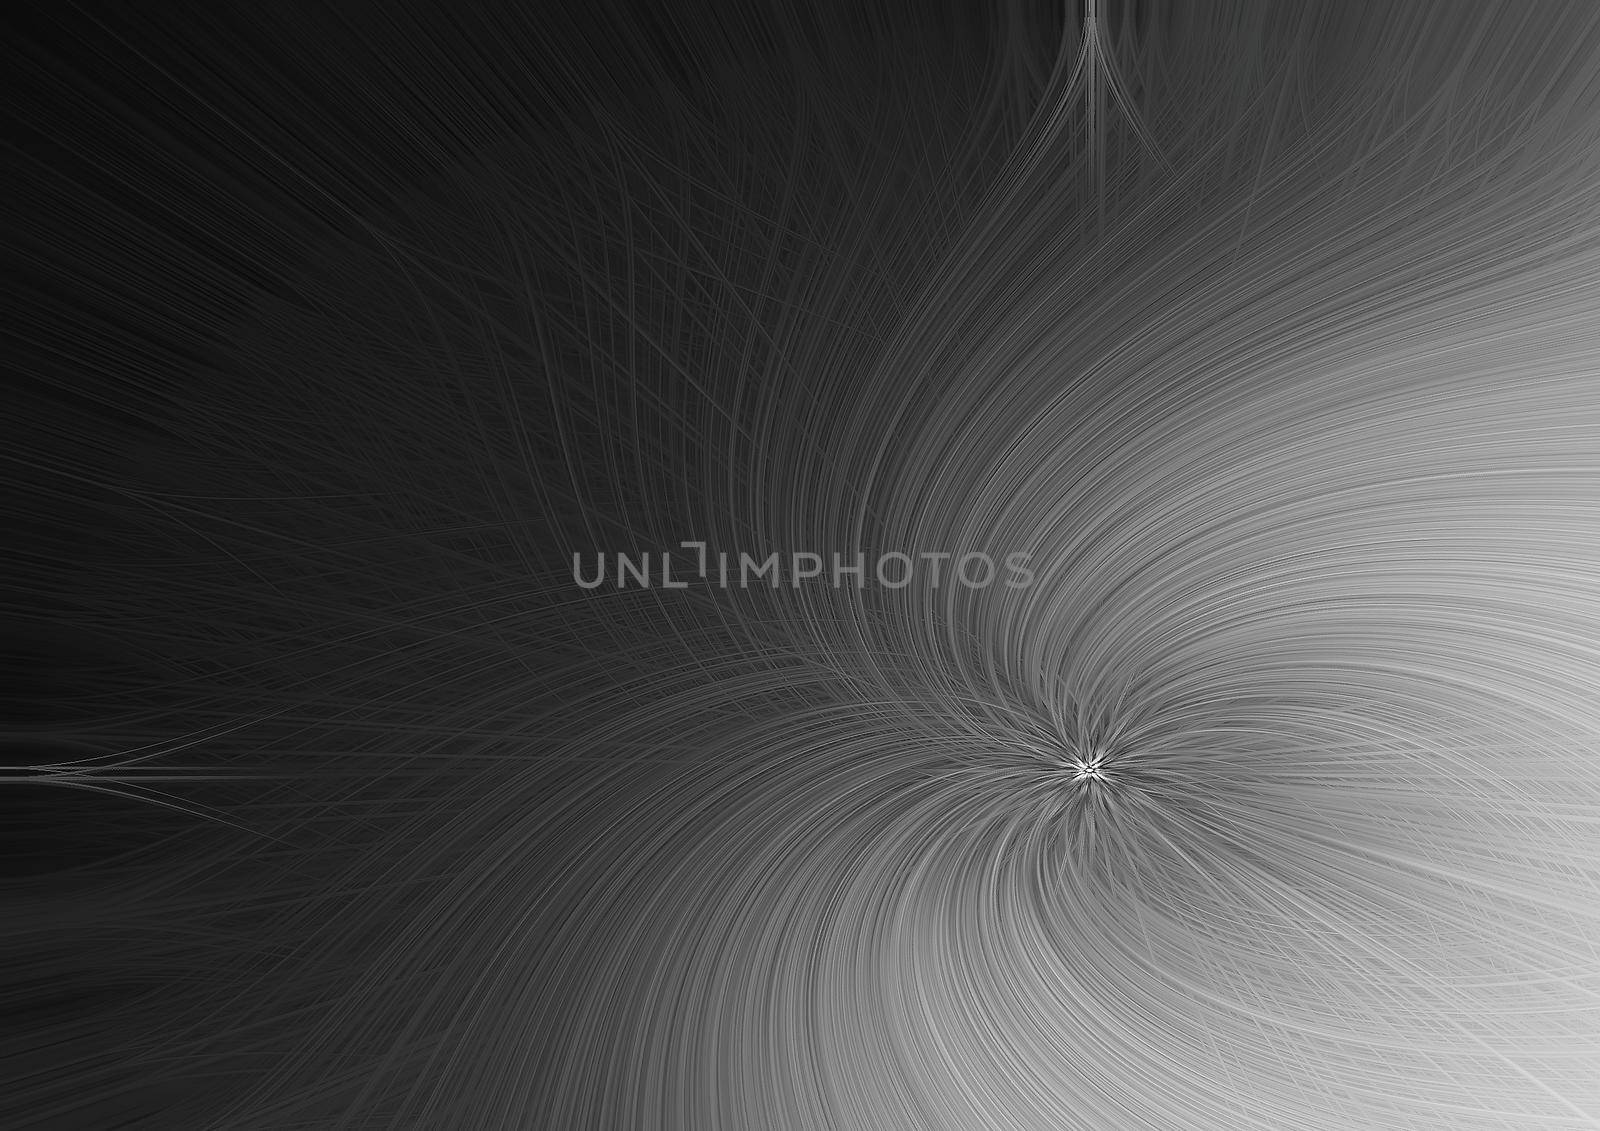 Texture, background for further work. Illustration in shades of gray, fantastic vortex of rays